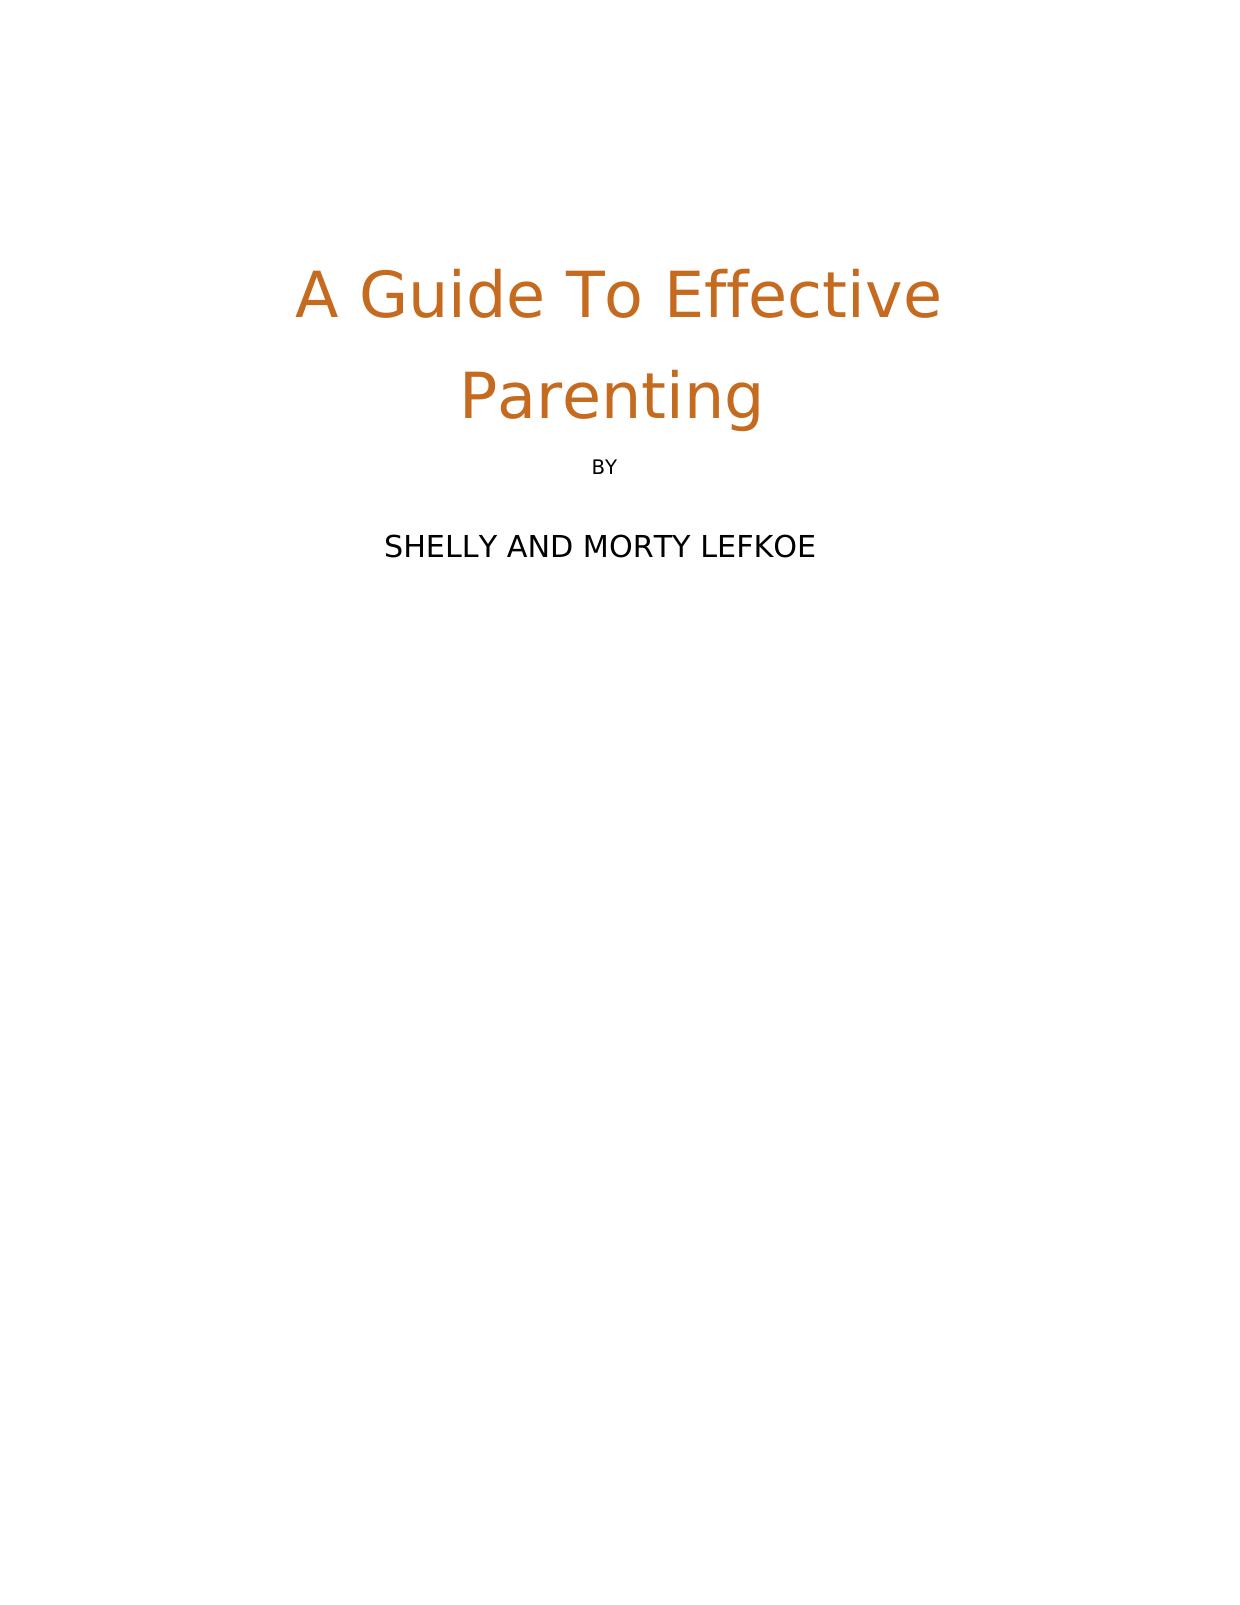 A Guide To Effective Parenting BY SHELLY LEFKOE , MORTY LEFKOE author of re create your life by SHELLY LEFKOE MORTY LEFKOE Werner Erhard Eckhart Tolle